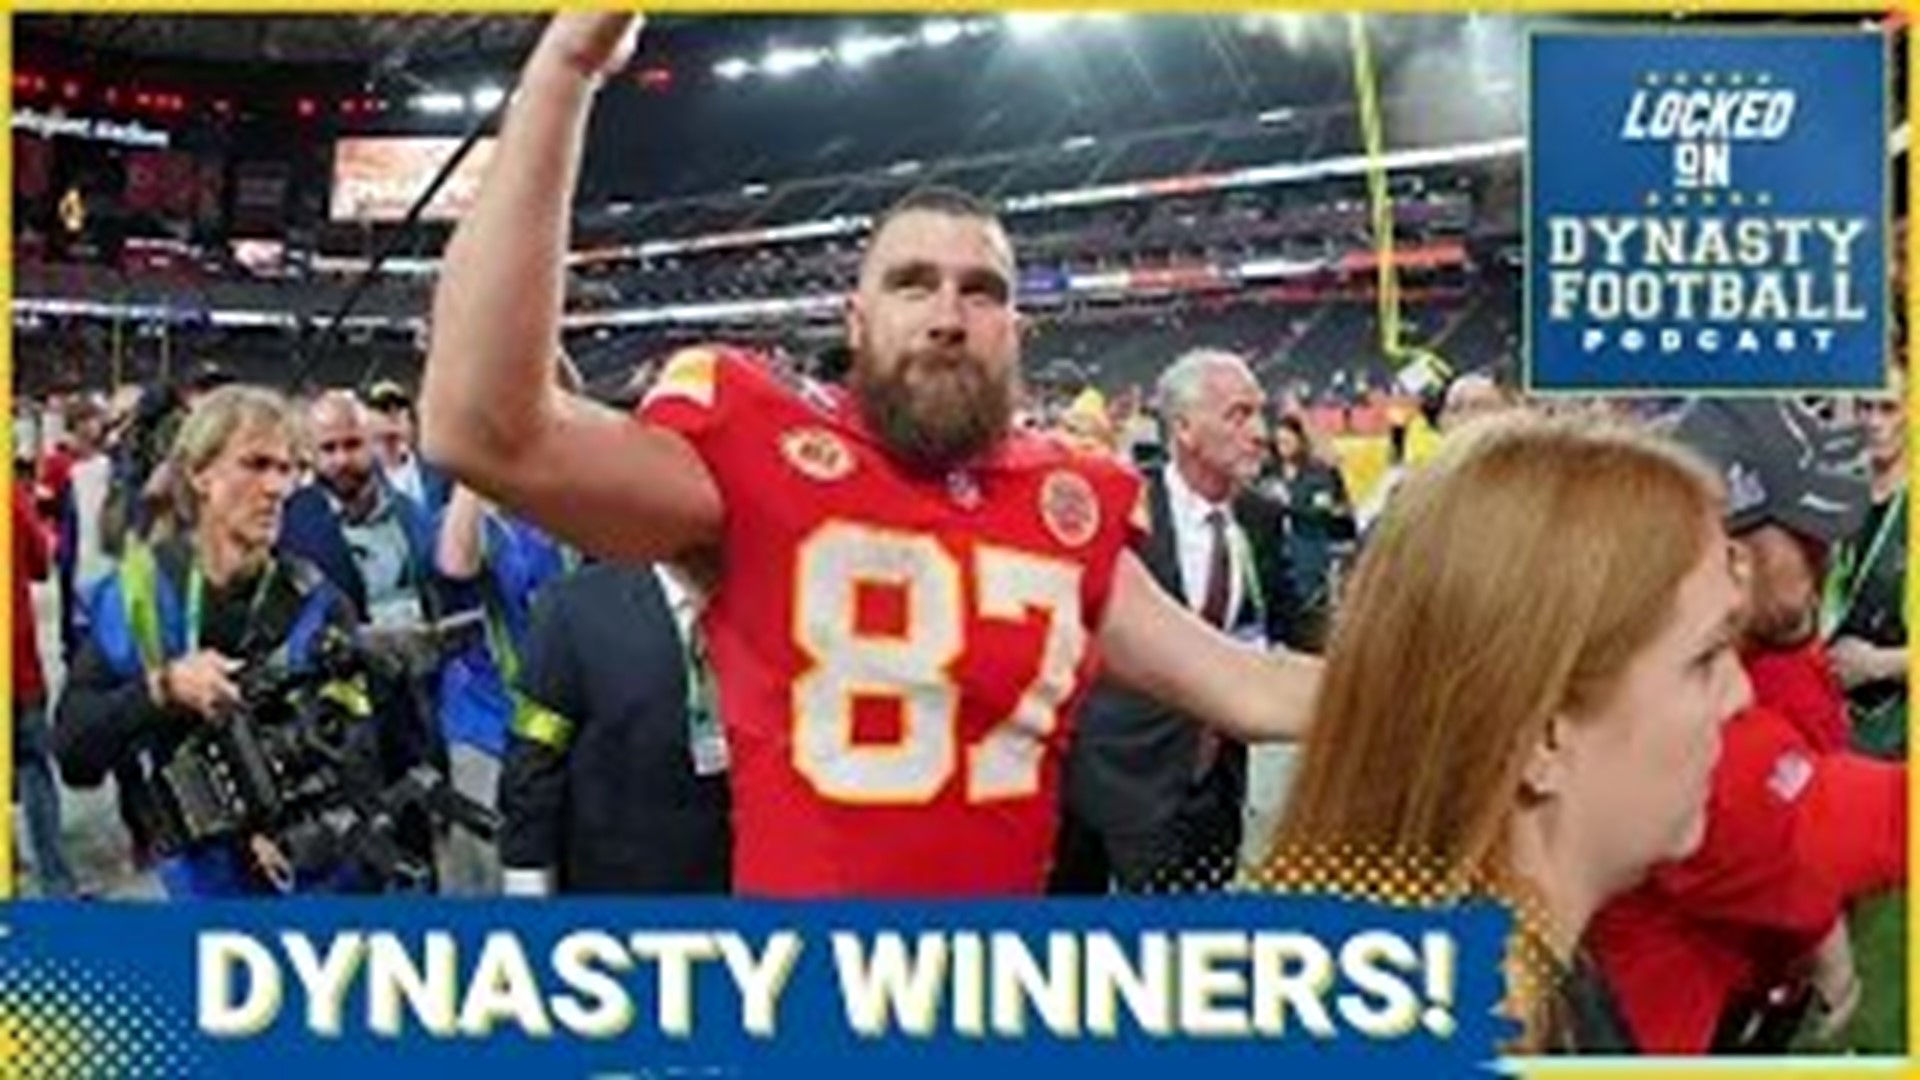 The Kansas City Chiefs are Super Bowl champions once again. But who are the biggest dynasty winners coming out of this game?